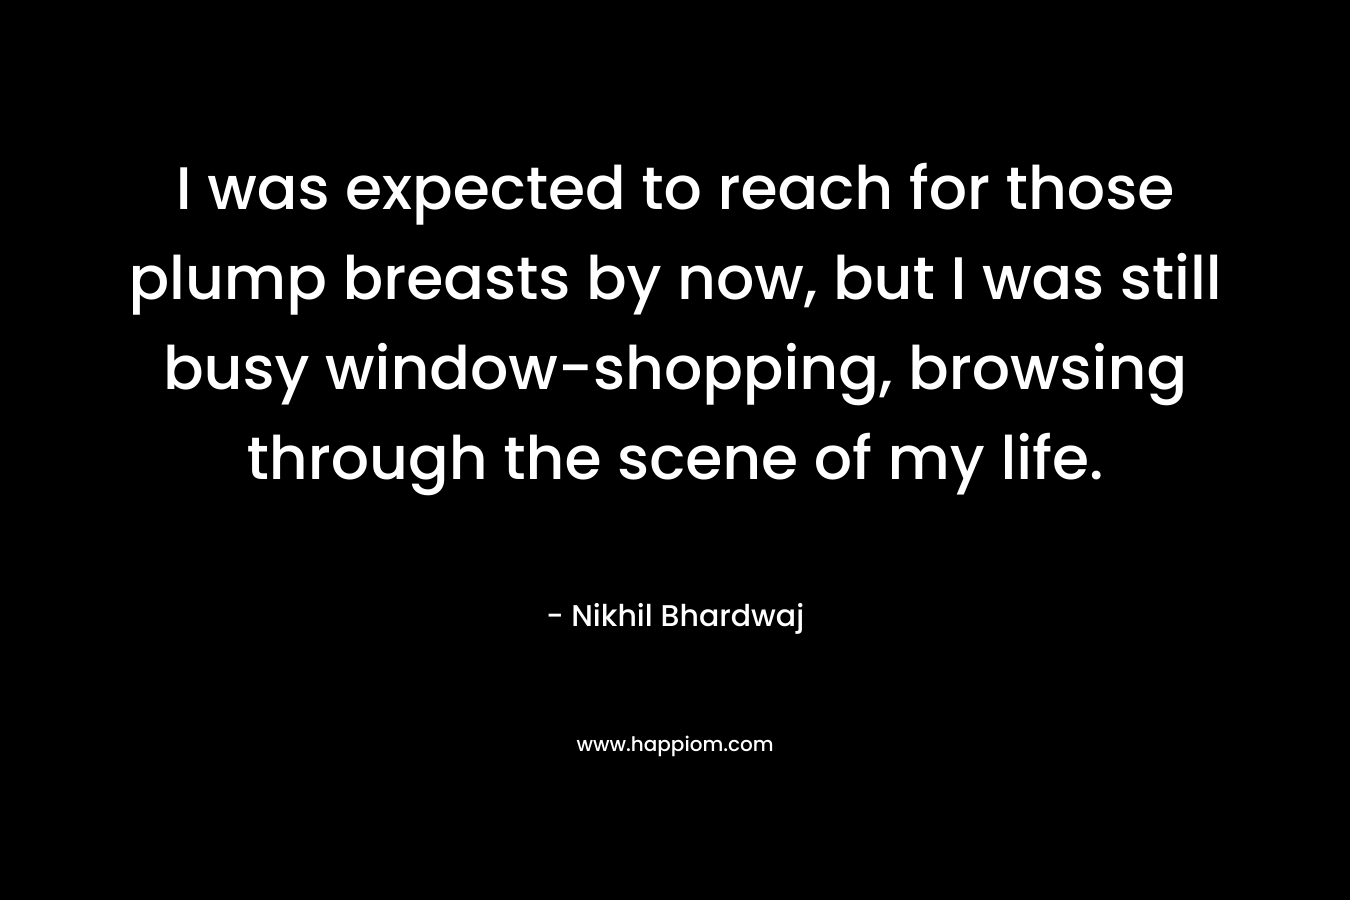 I was expected to reach for those plump breasts by now, but I was still busy window-shopping, browsing through the scene of my life. – Nikhil Bhardwaj